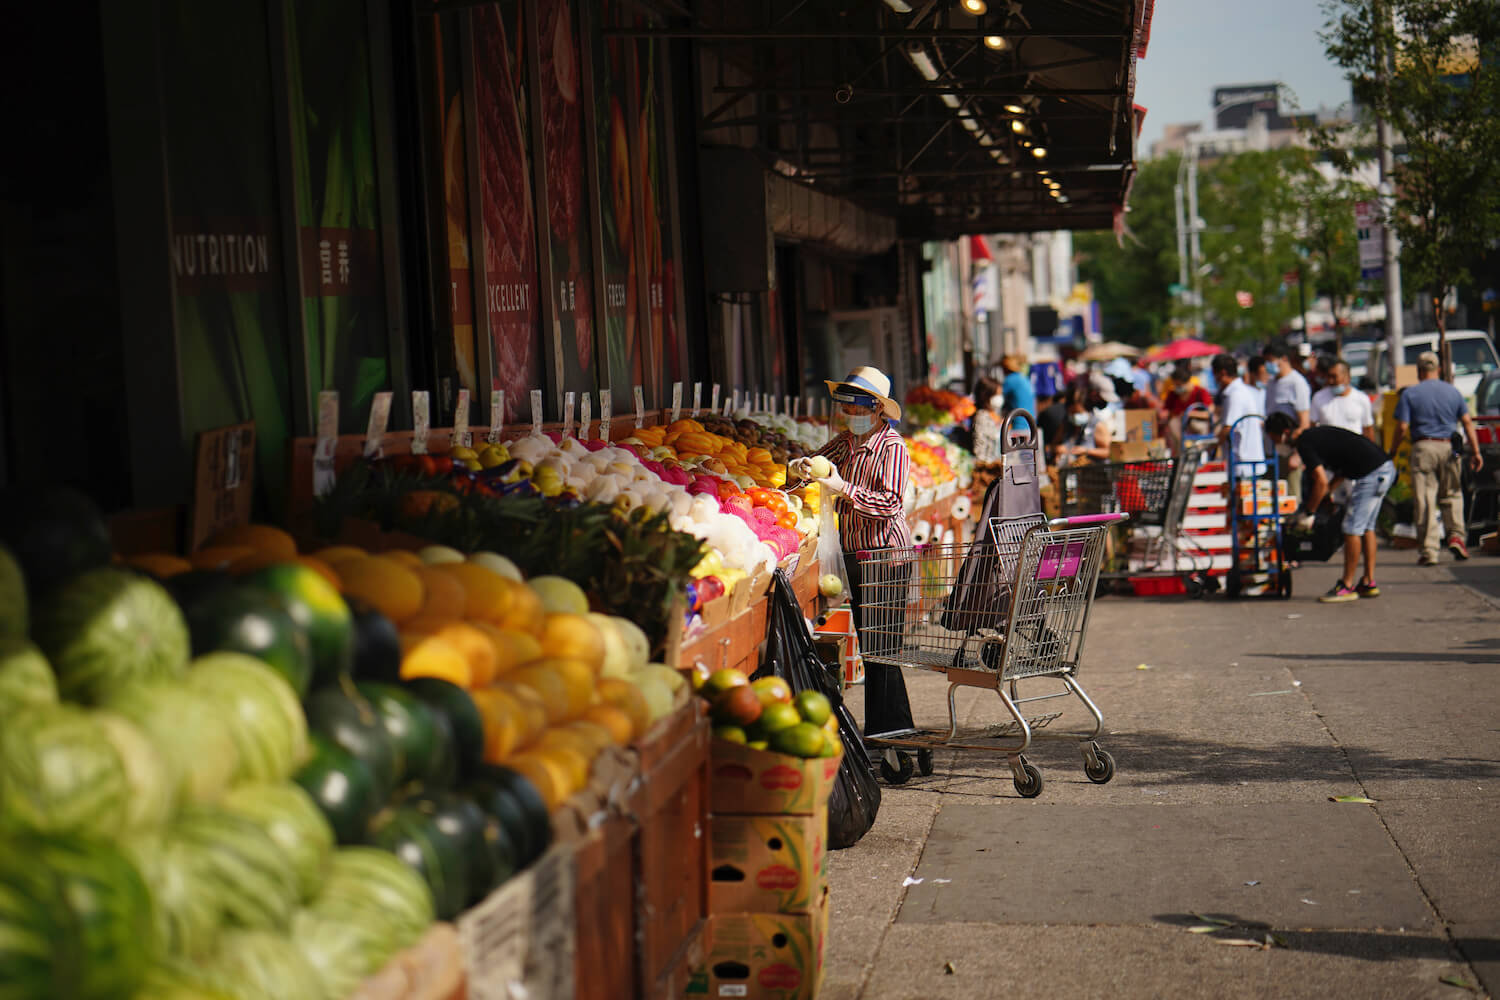 Shopping for groceries during Covid-19 pandemic in Queens, NY